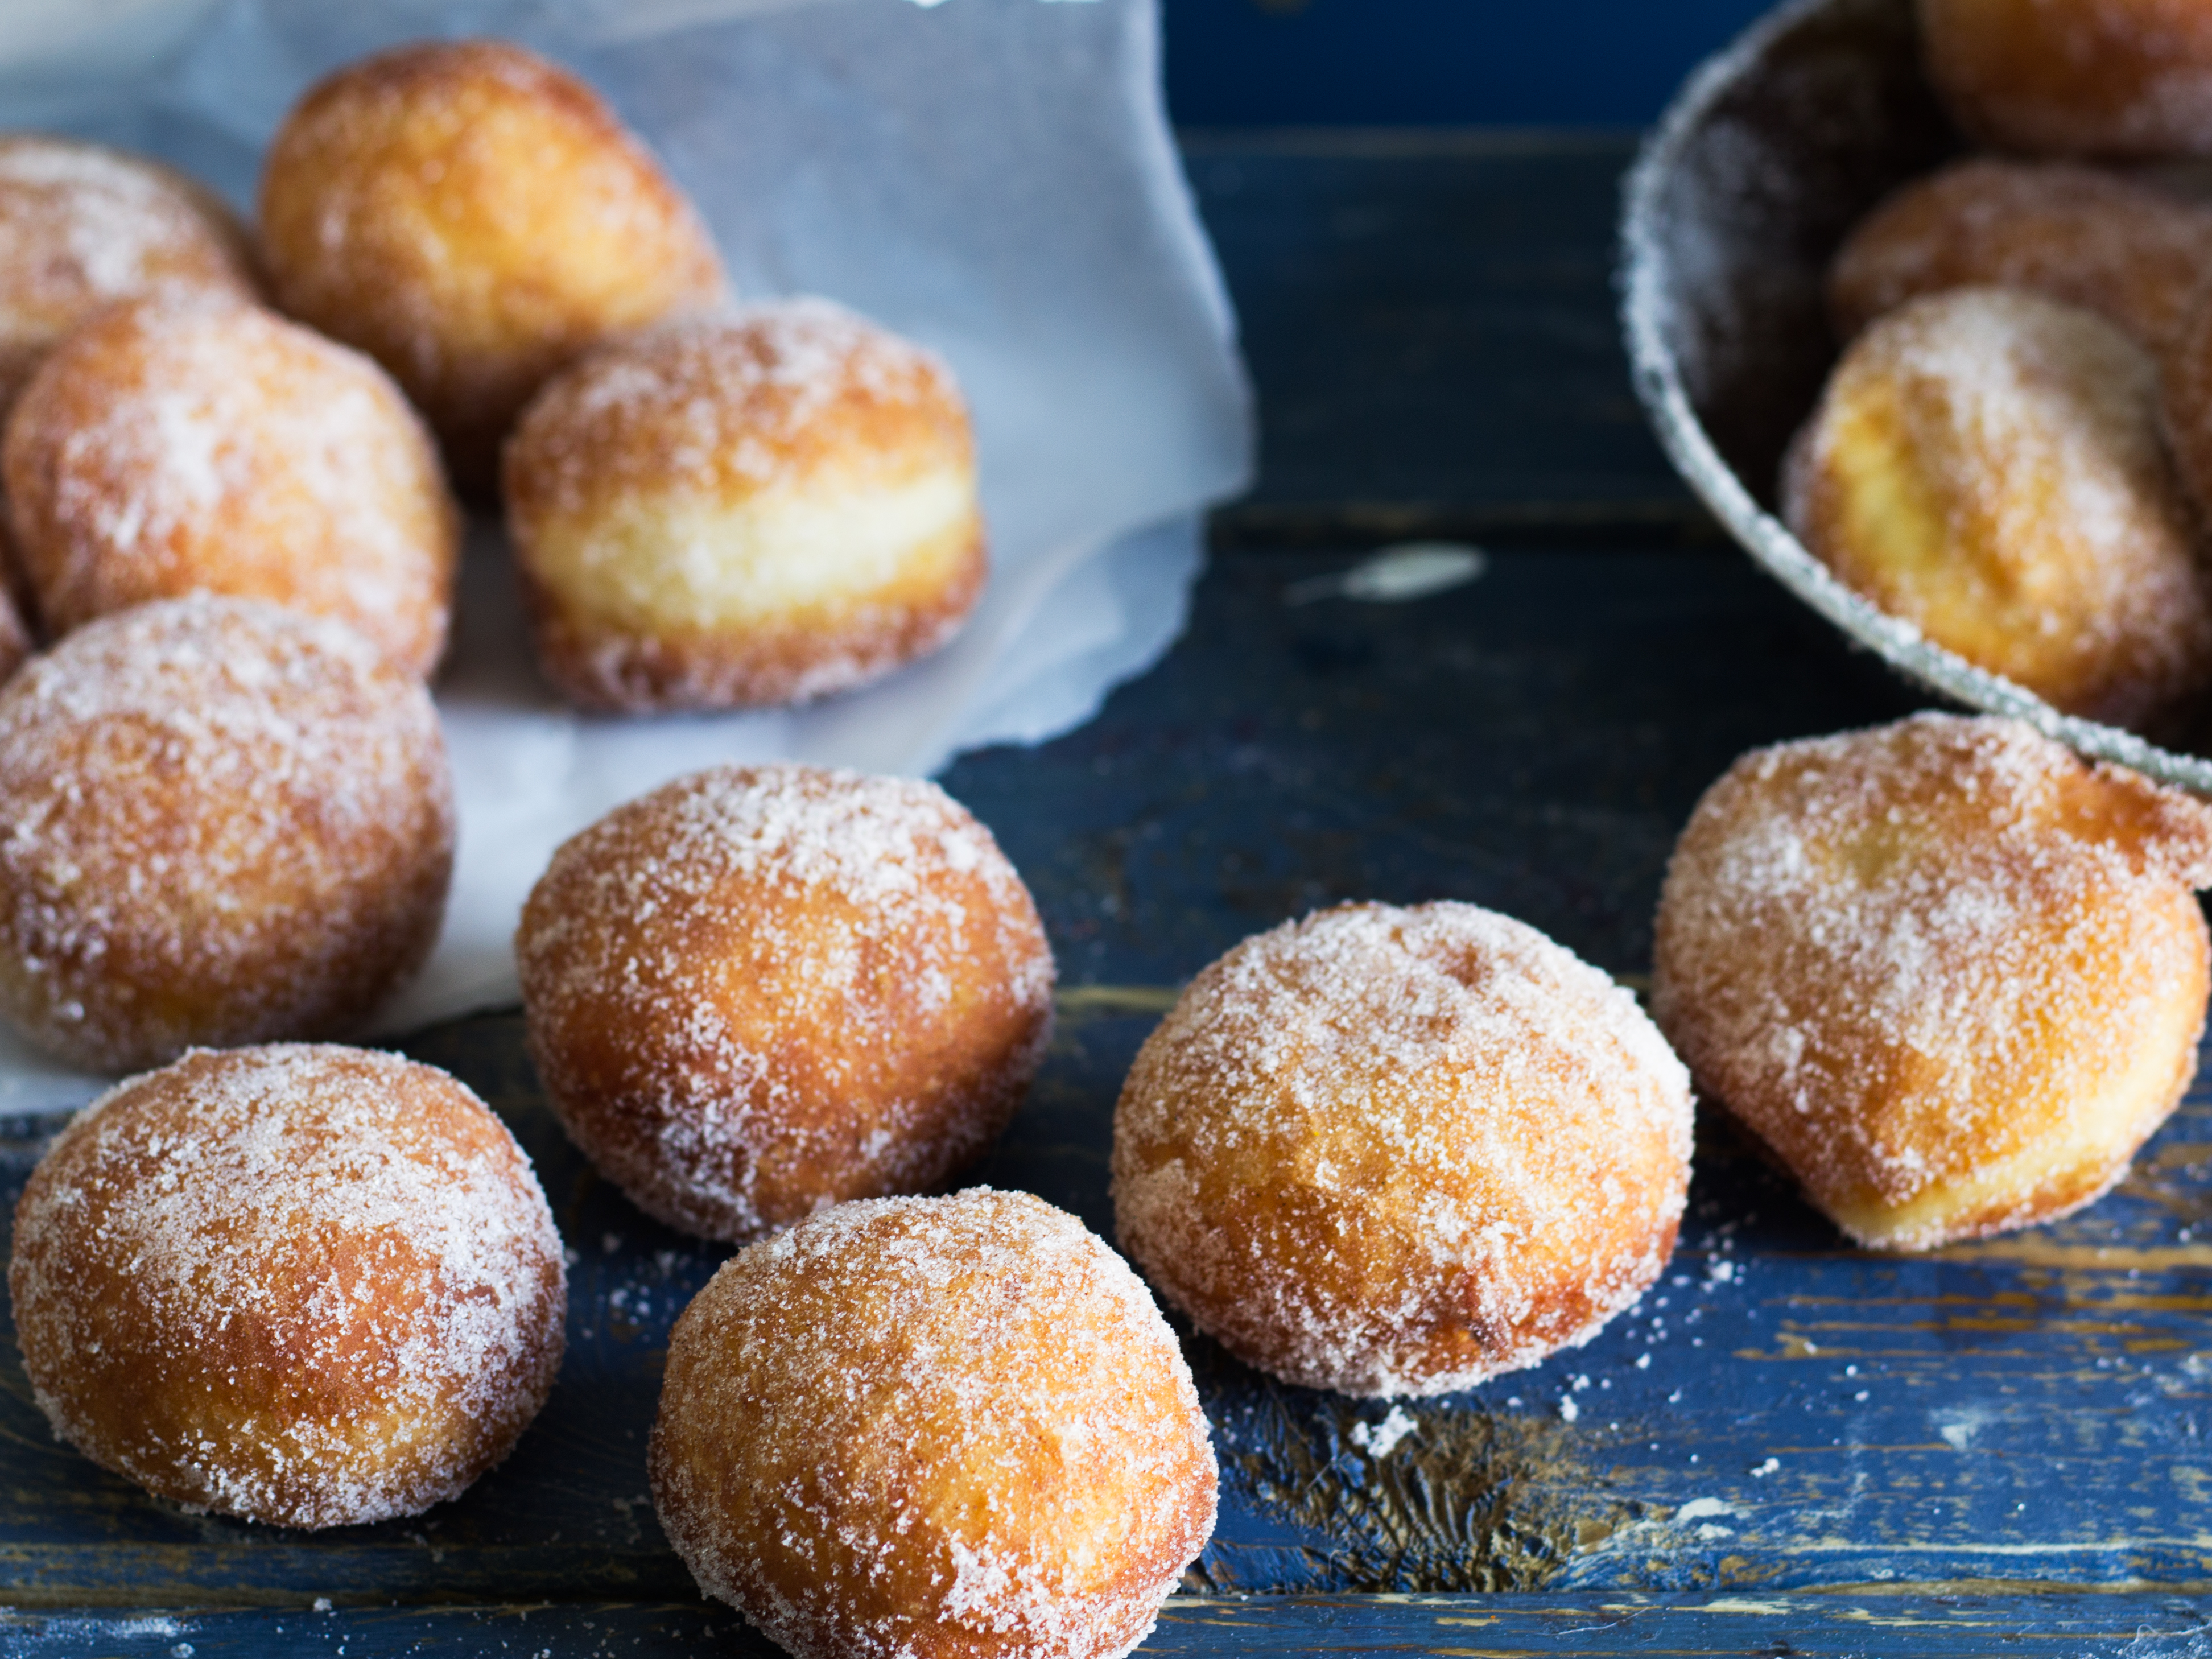 Sugar and spice doughnut bites - great for Bonfire Night